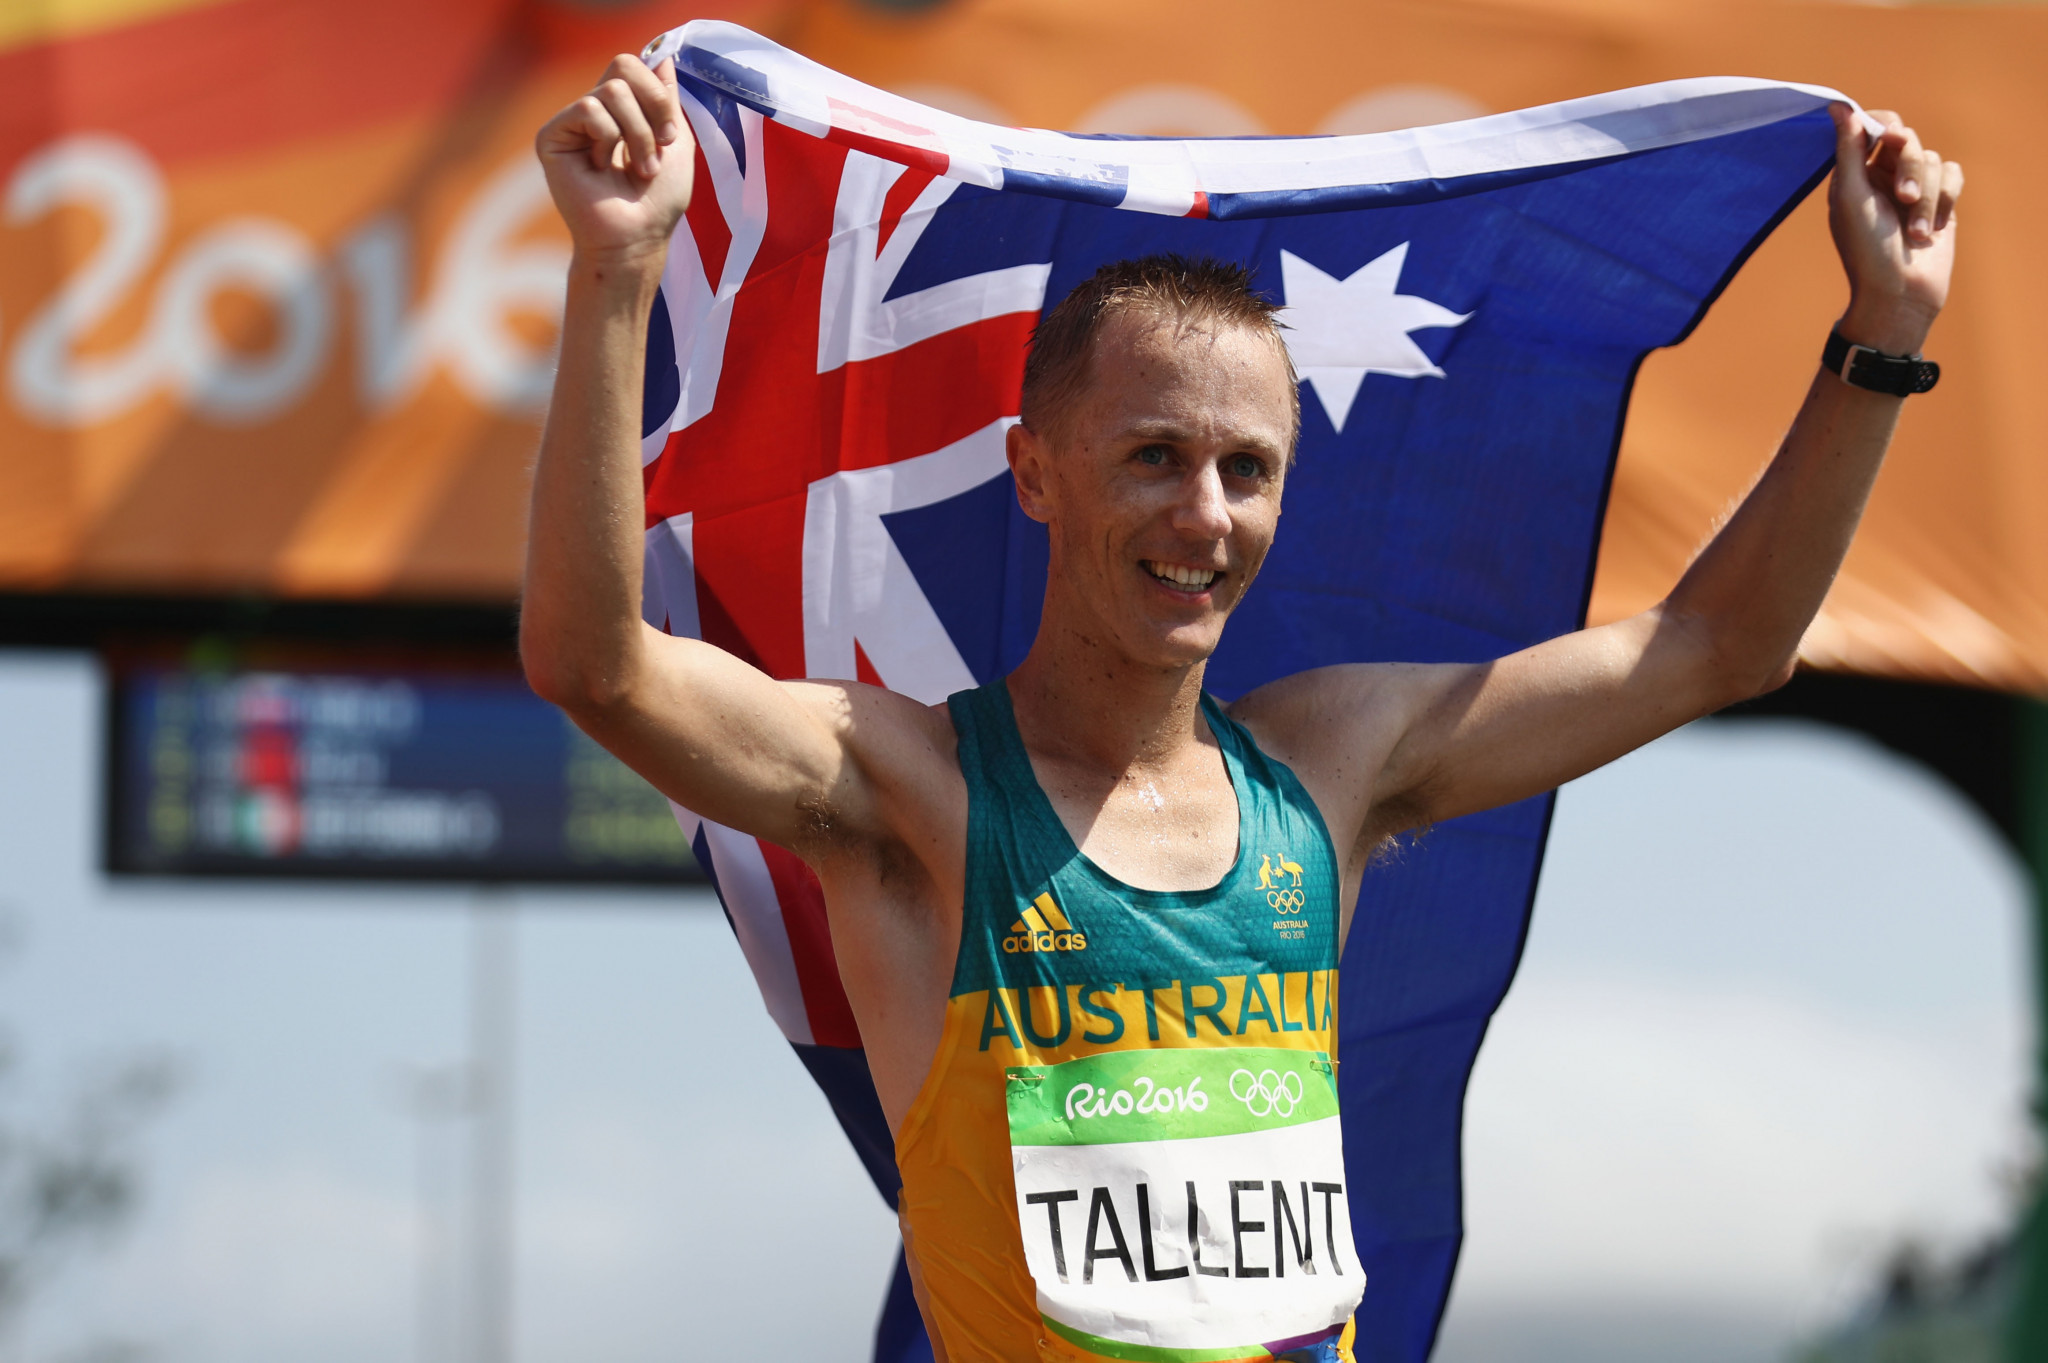 Australia's Jared Tallent plans to extend his career to compete at Tokyo 2020 ©Getty Images